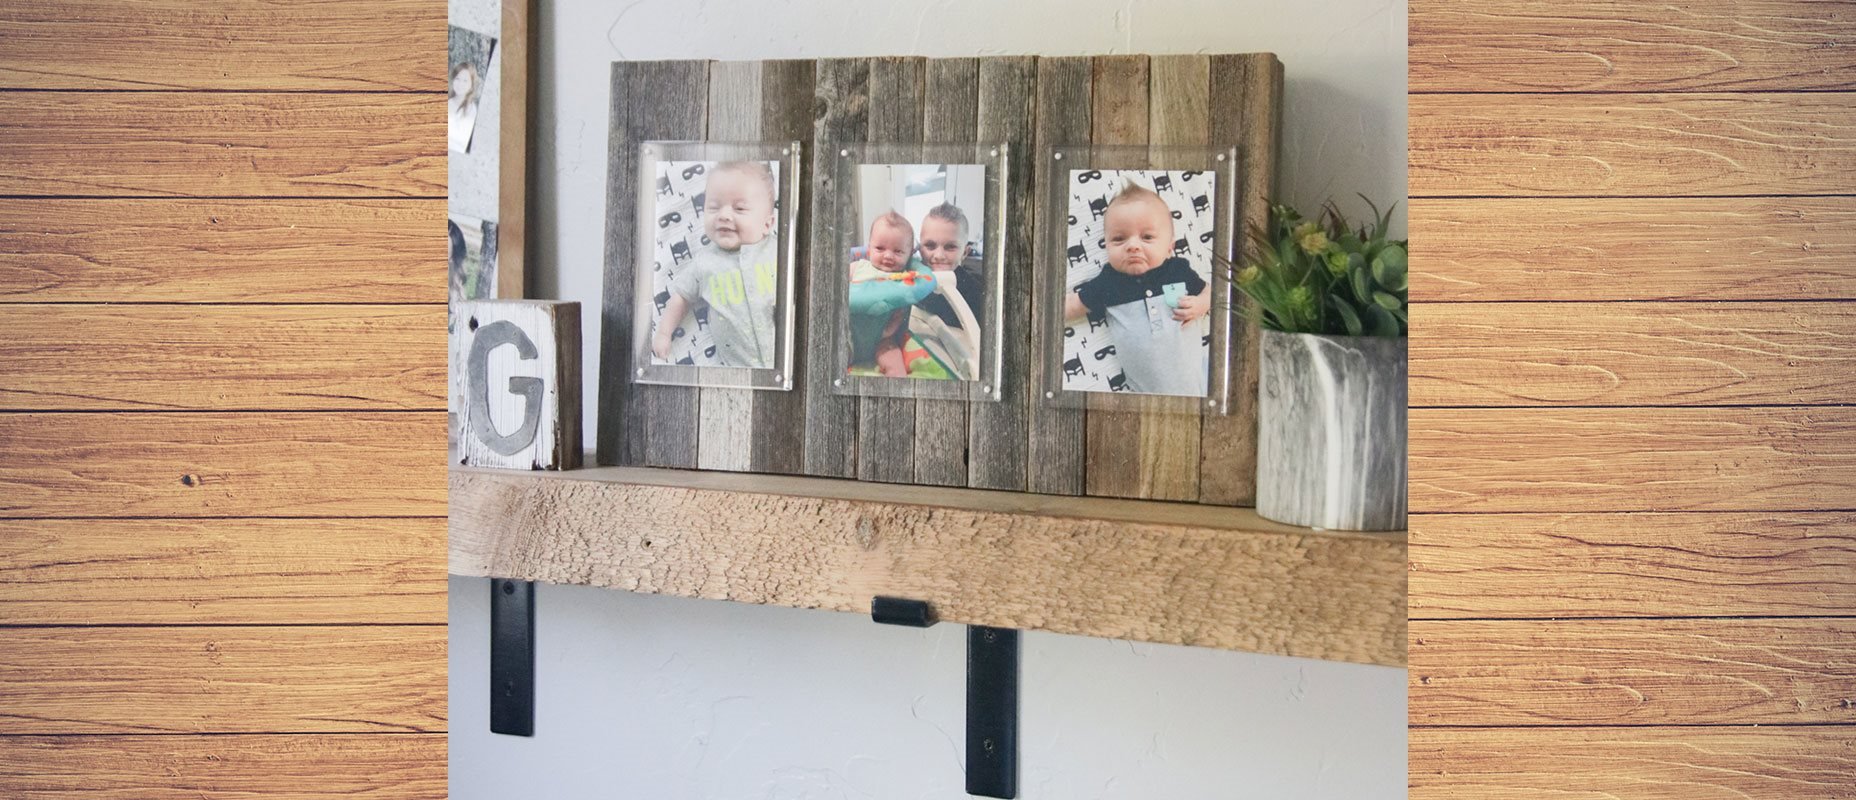 How to Build a DIY Reclaimed Wood Frame